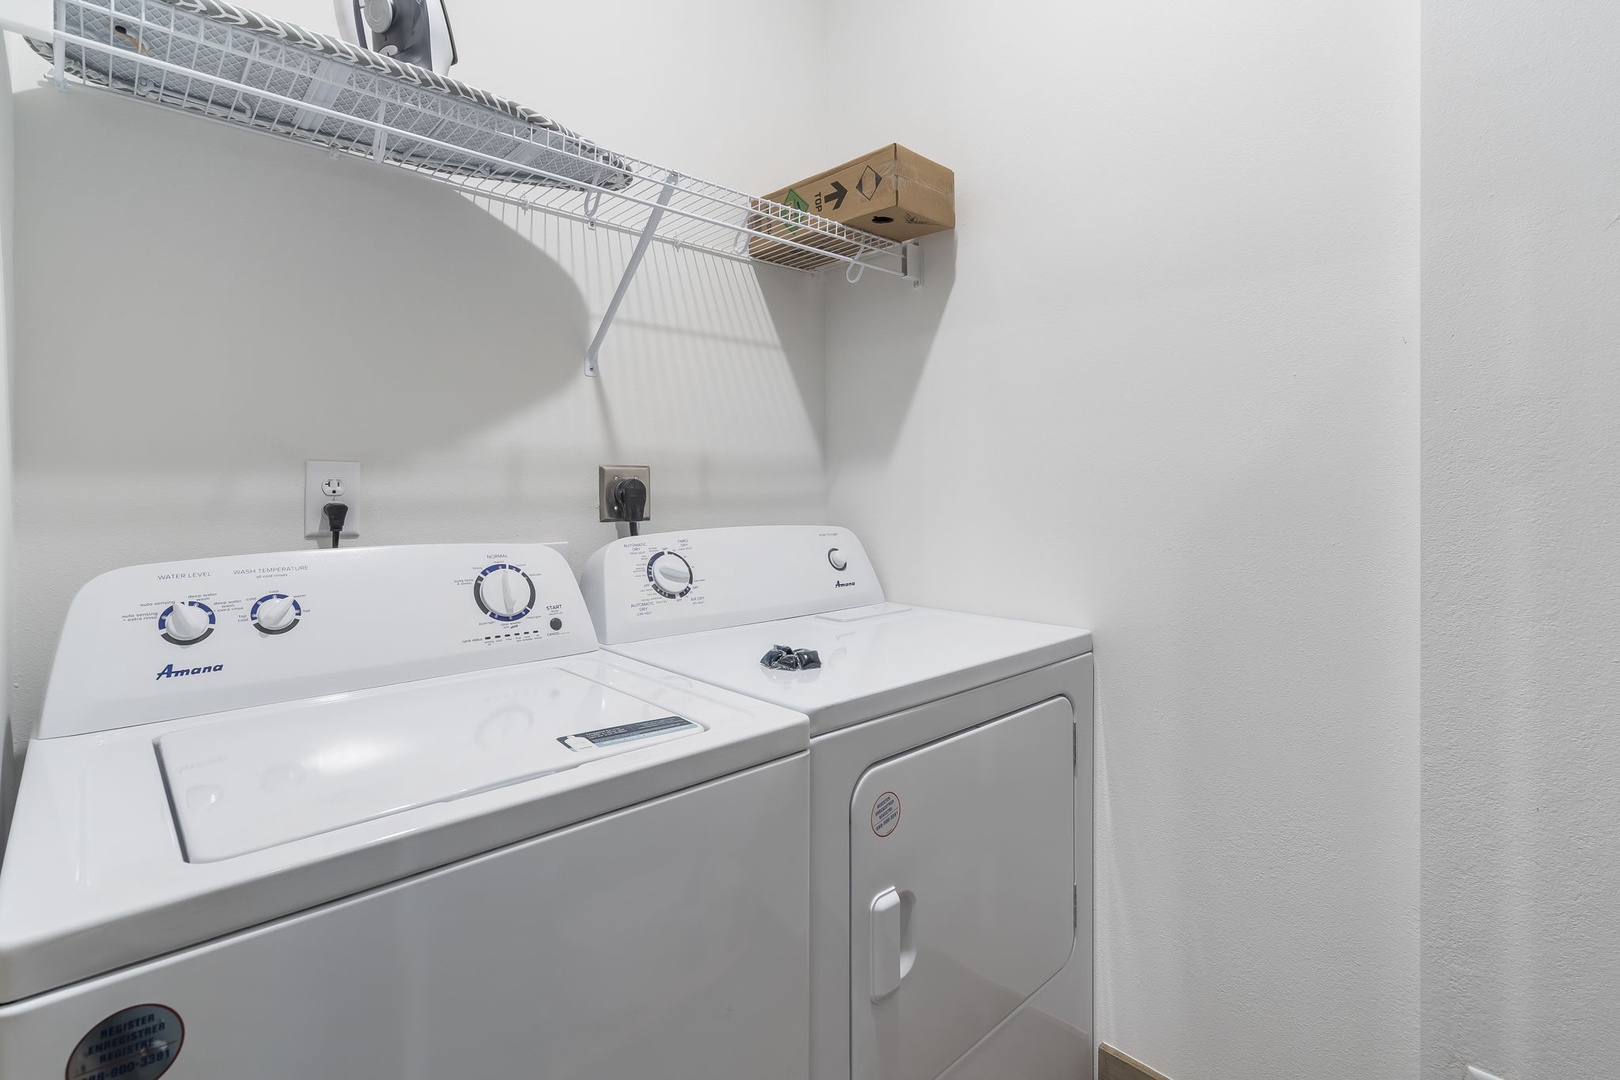 Private laundry is available for your stay, tucked away in a dedicated closet